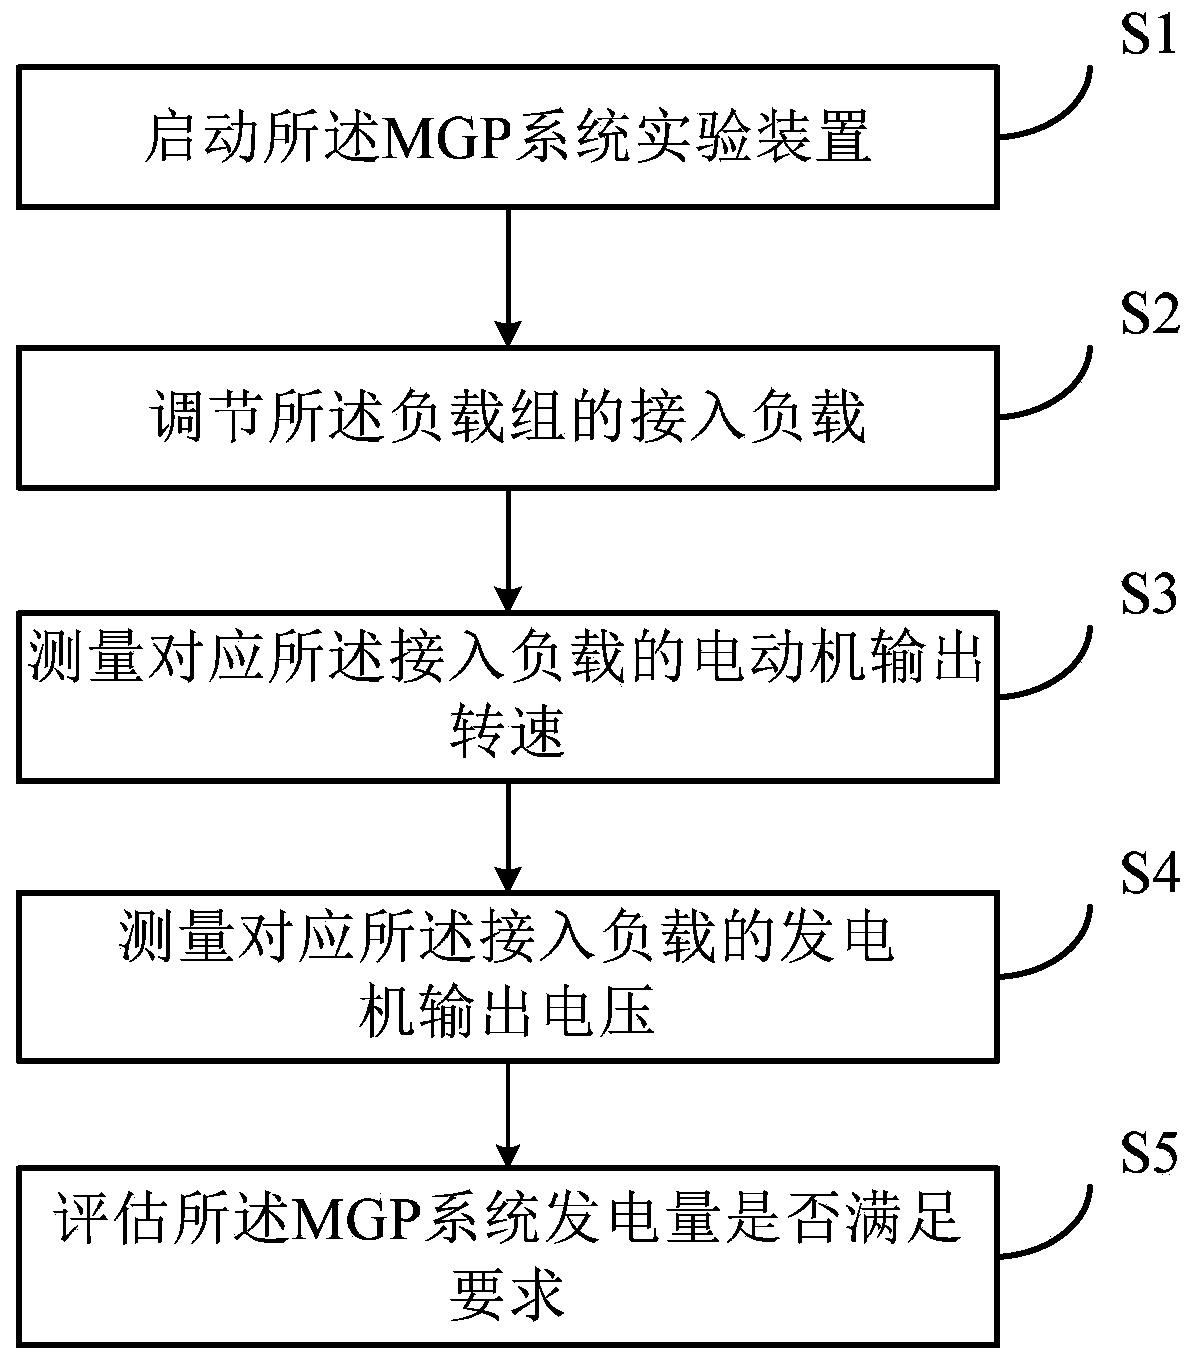 Method for evaluating generating capacity of MGP system